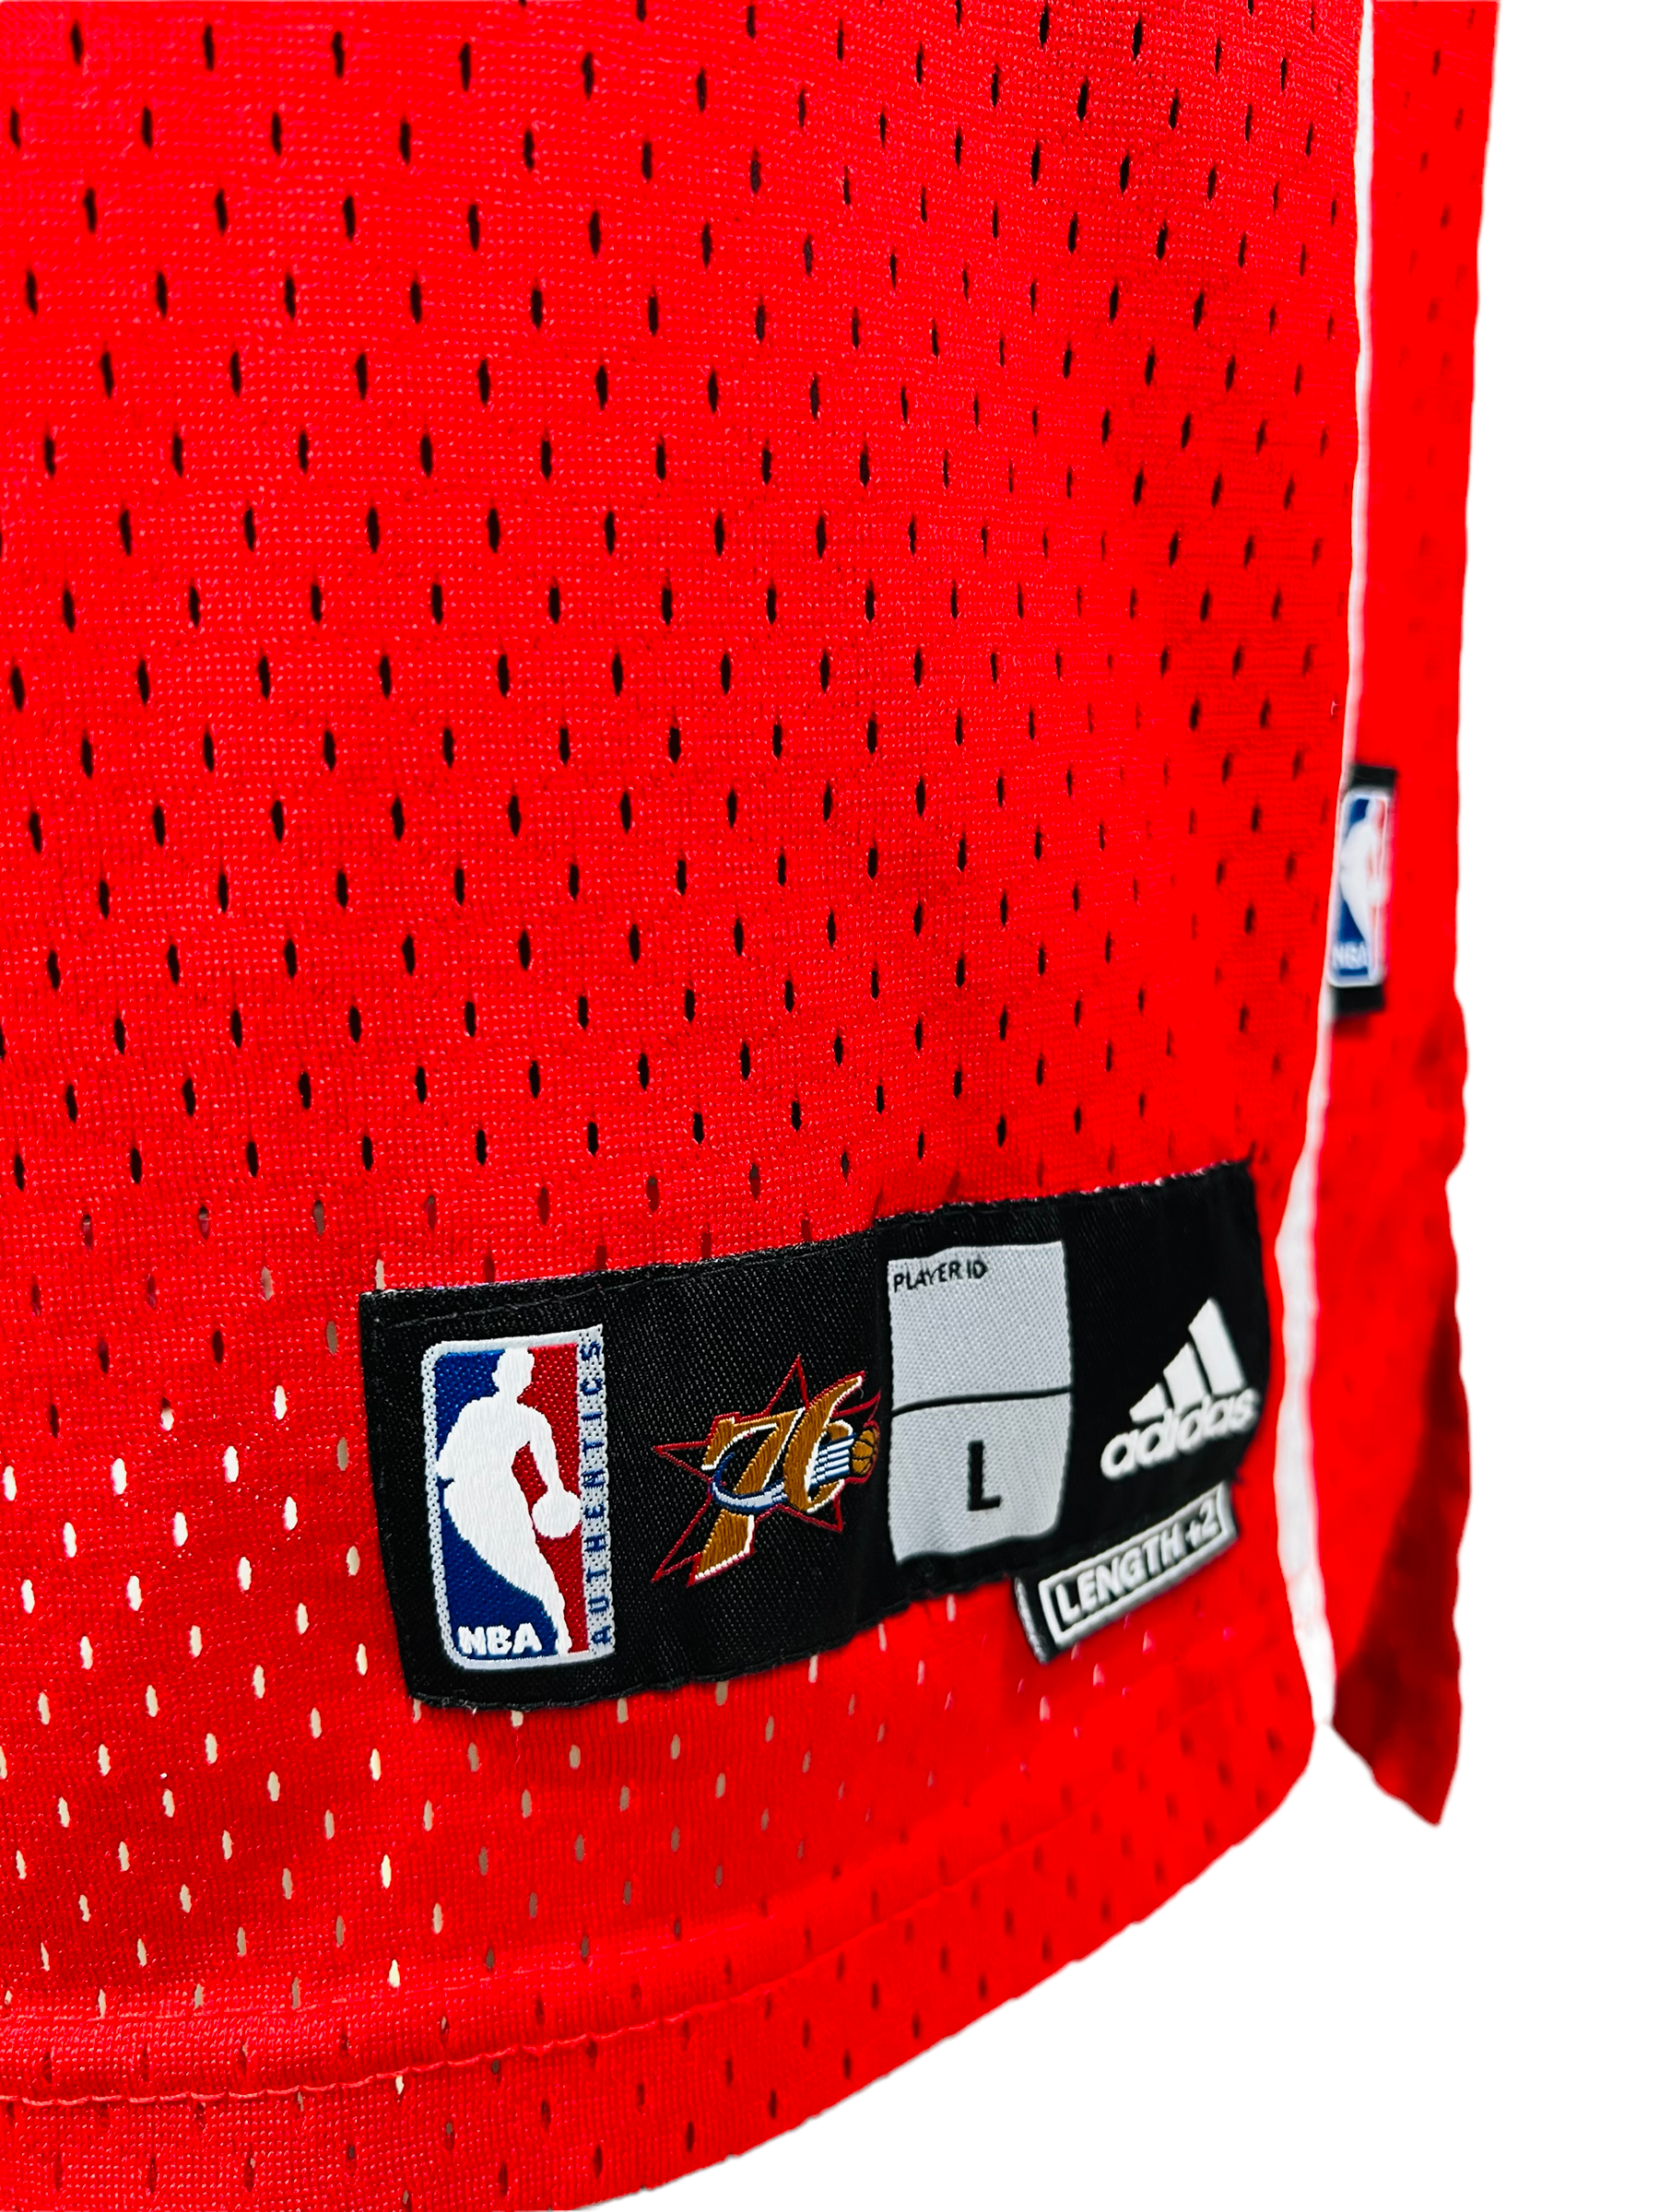 Reversible practice jerseys basketball suppliers and manufacturers store